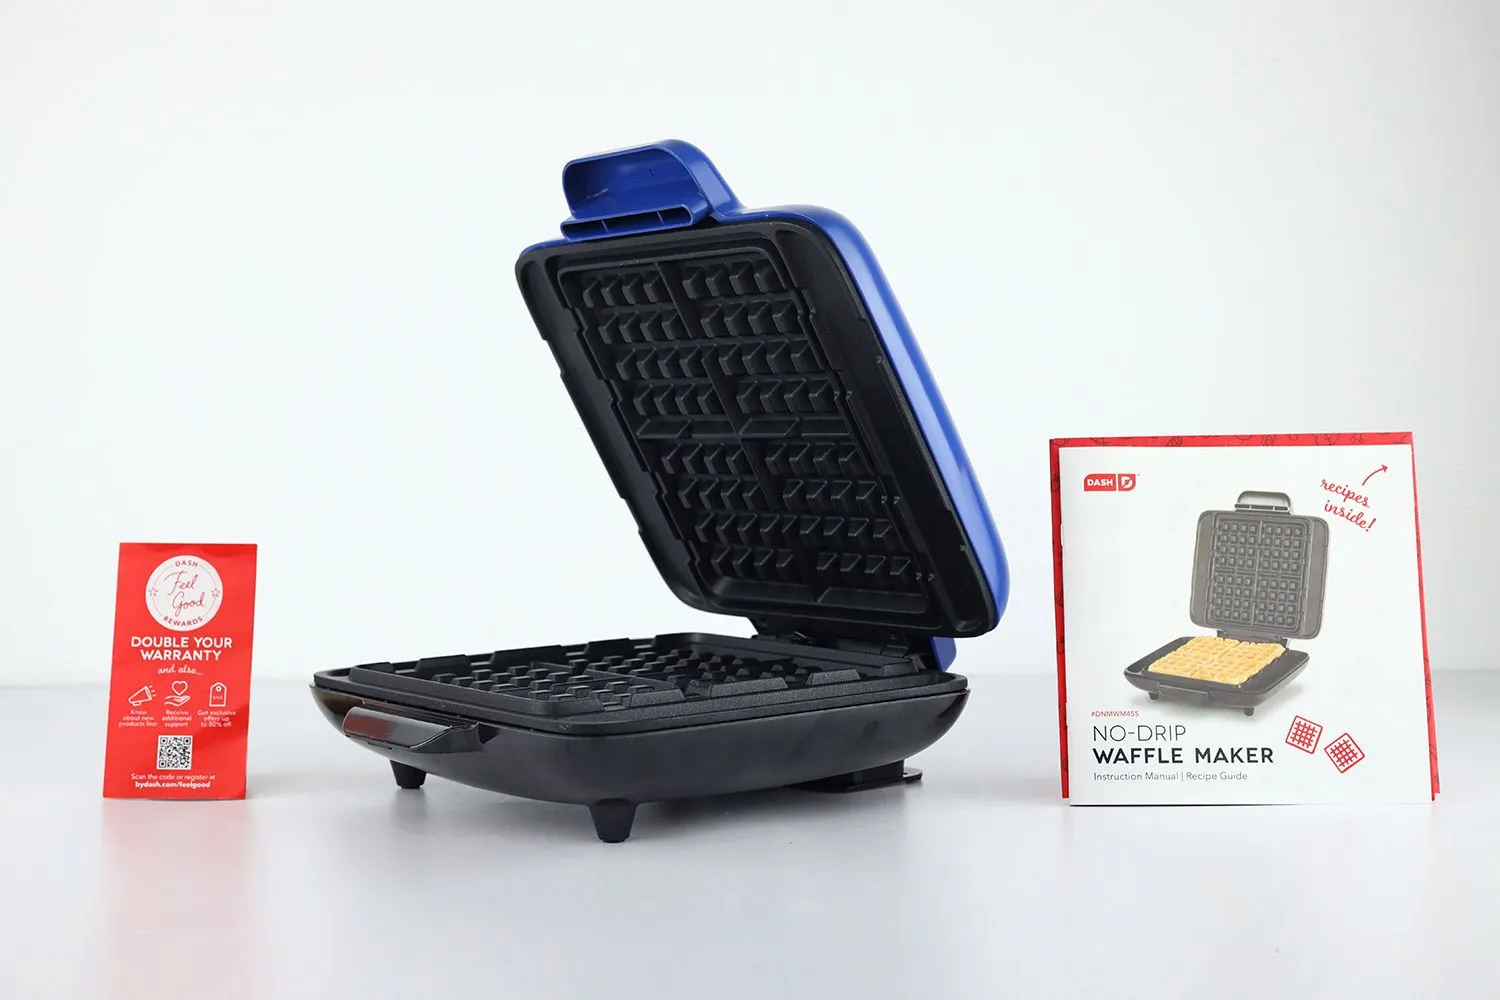 Kitchen HQ 2-in-1 Belgian and Stuffed Waffle Maker - 20807797, HSN in 2023